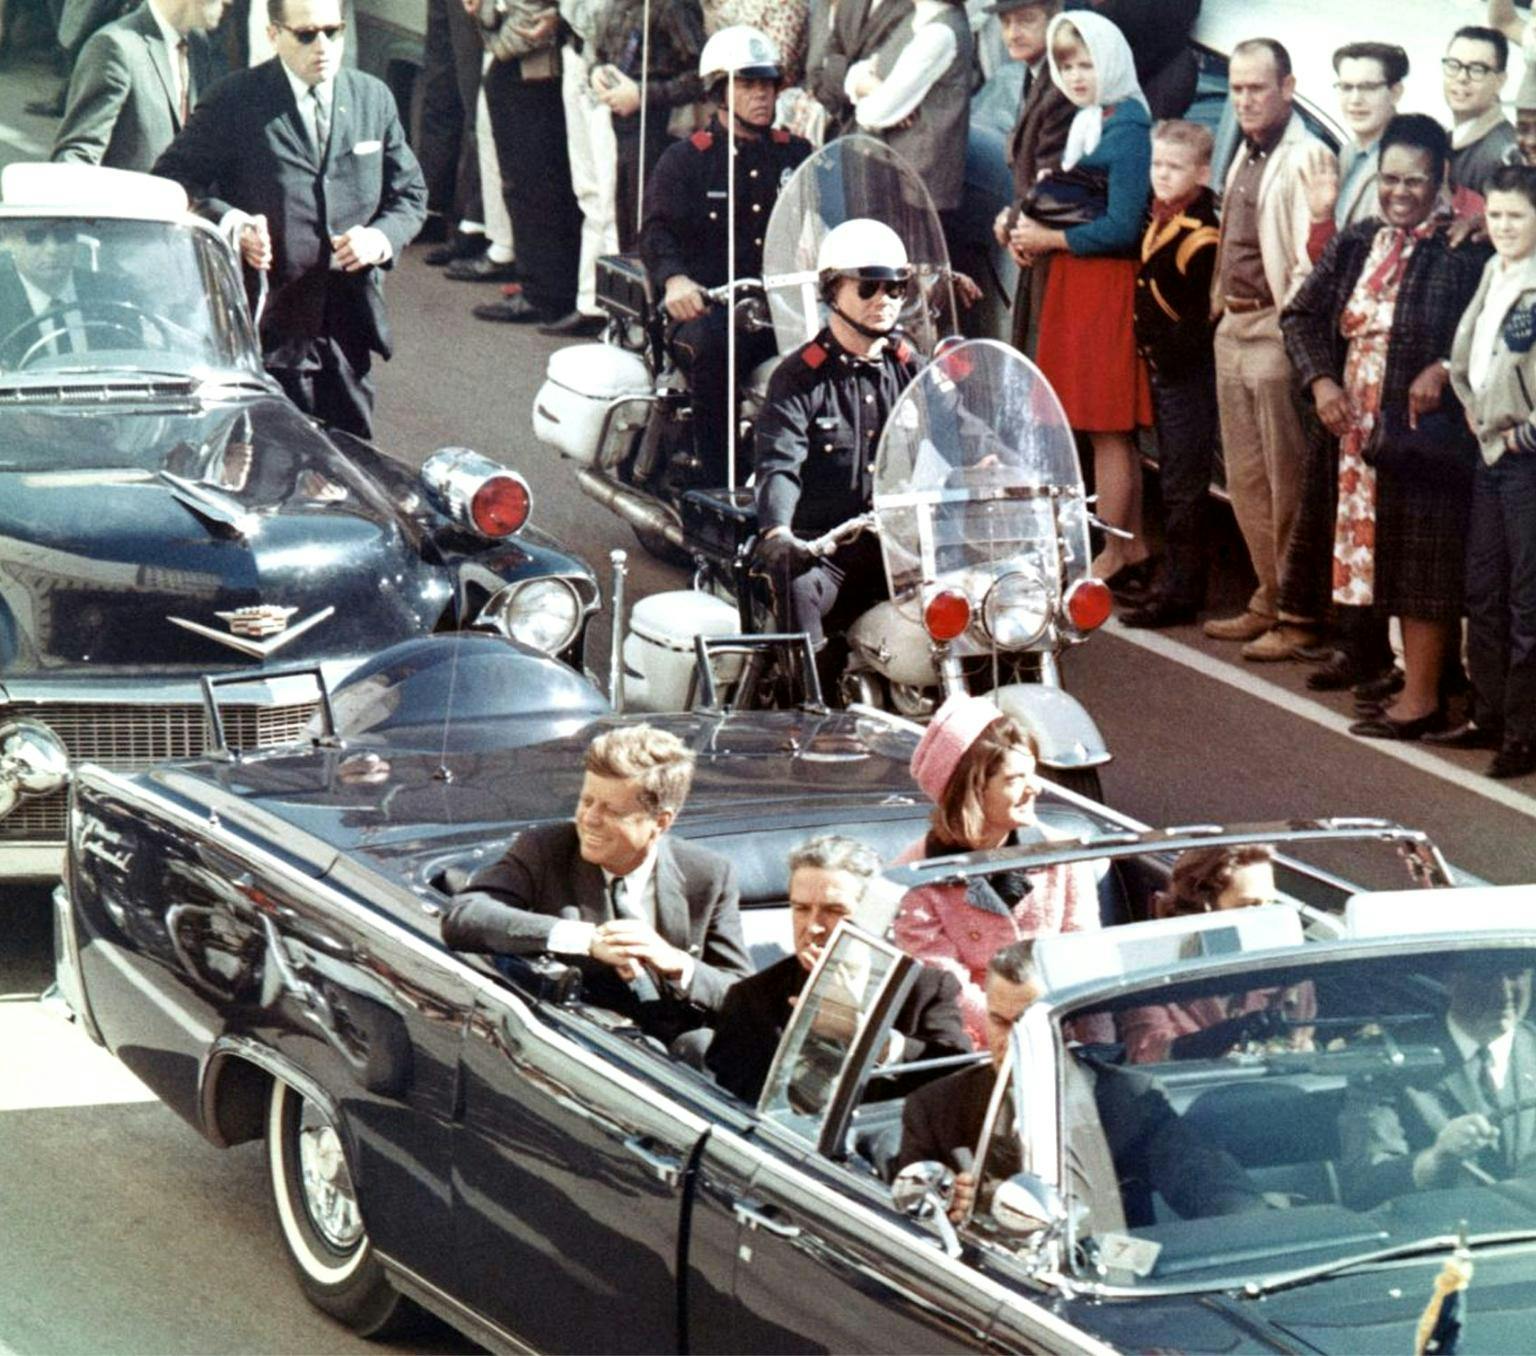 President John F Kennedy sits in the back seat of a convertible limousine. A policeman on a motorbike follows the car. The street is lined with people.